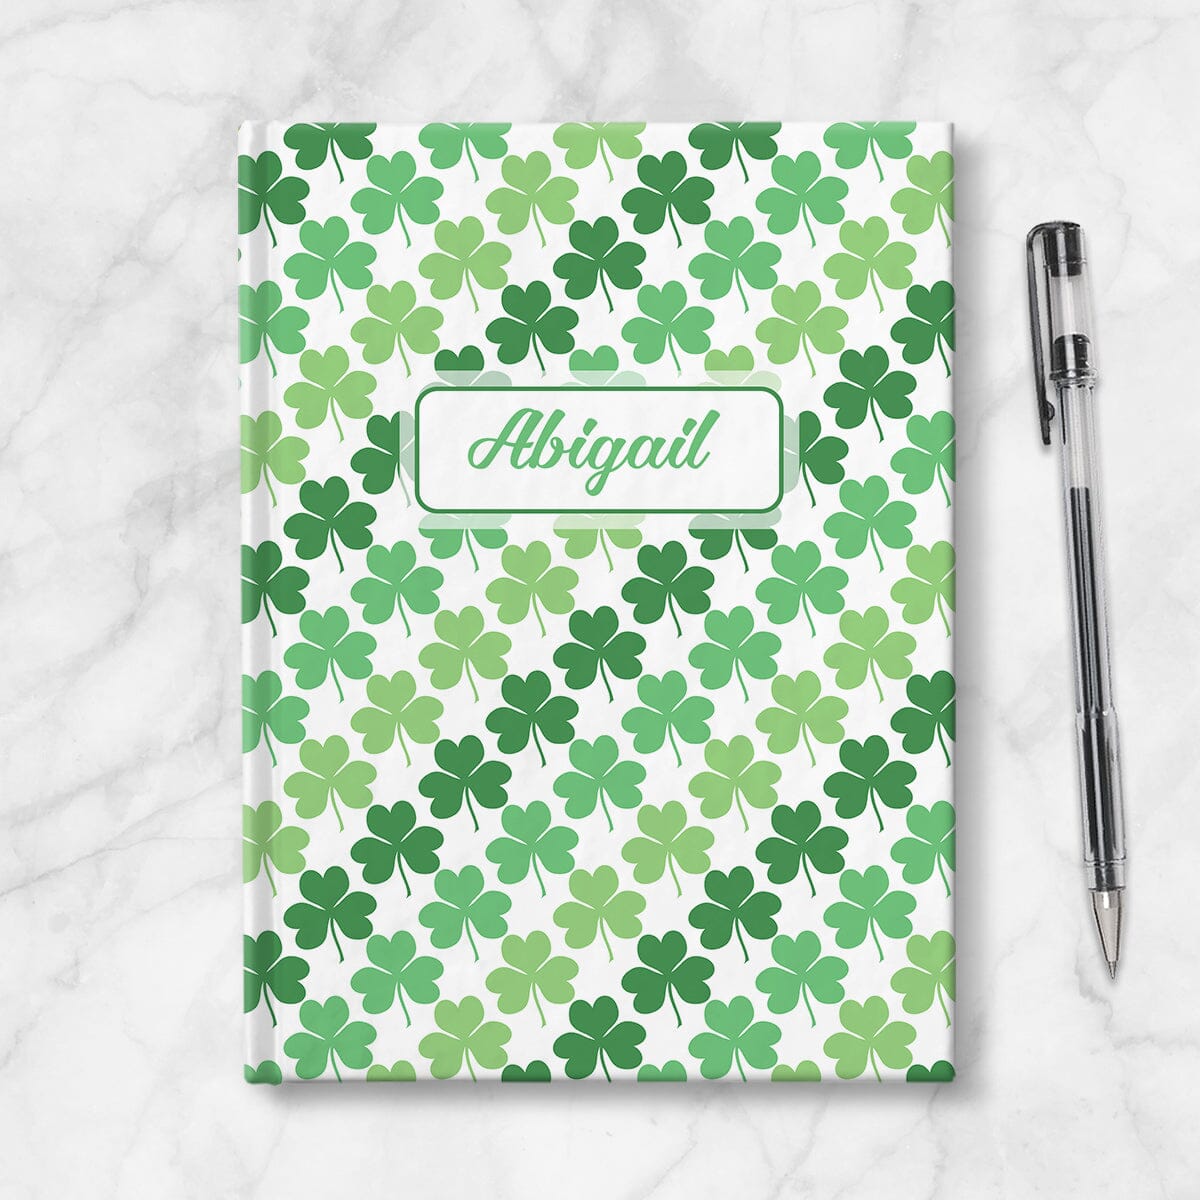 Personalized Green Clovers Pattern Journal at Artistically Invited. Image shows the book on a countertop next to a pen.